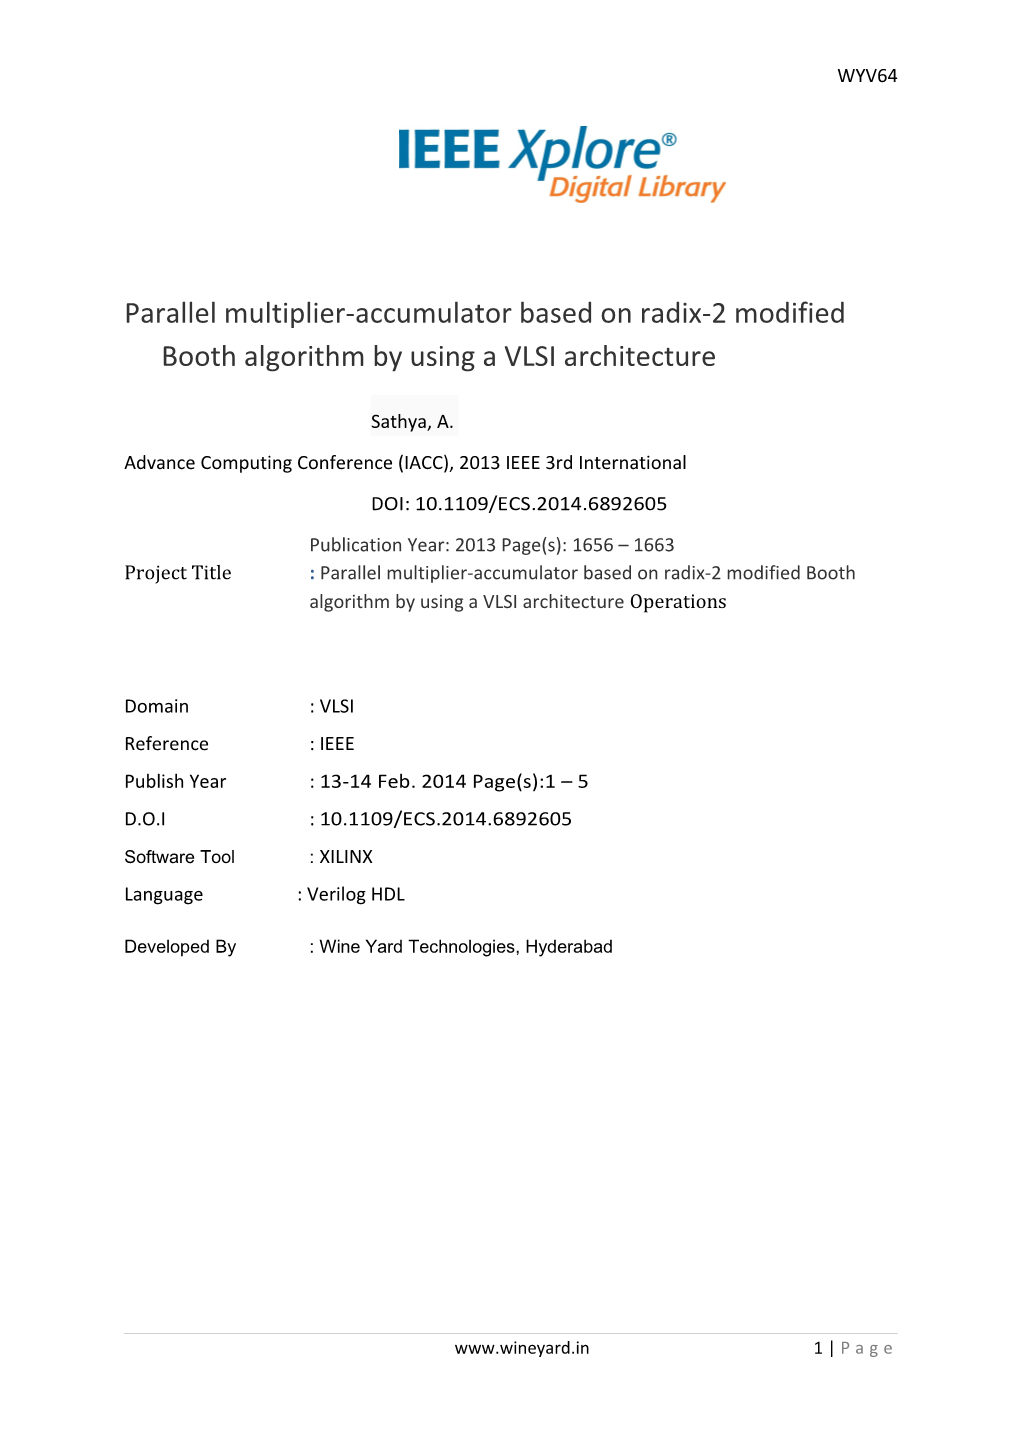 Parallel Multiplier-Accumulator Based on Radix-2 Modified Booth Algorithm by Using a VLSI